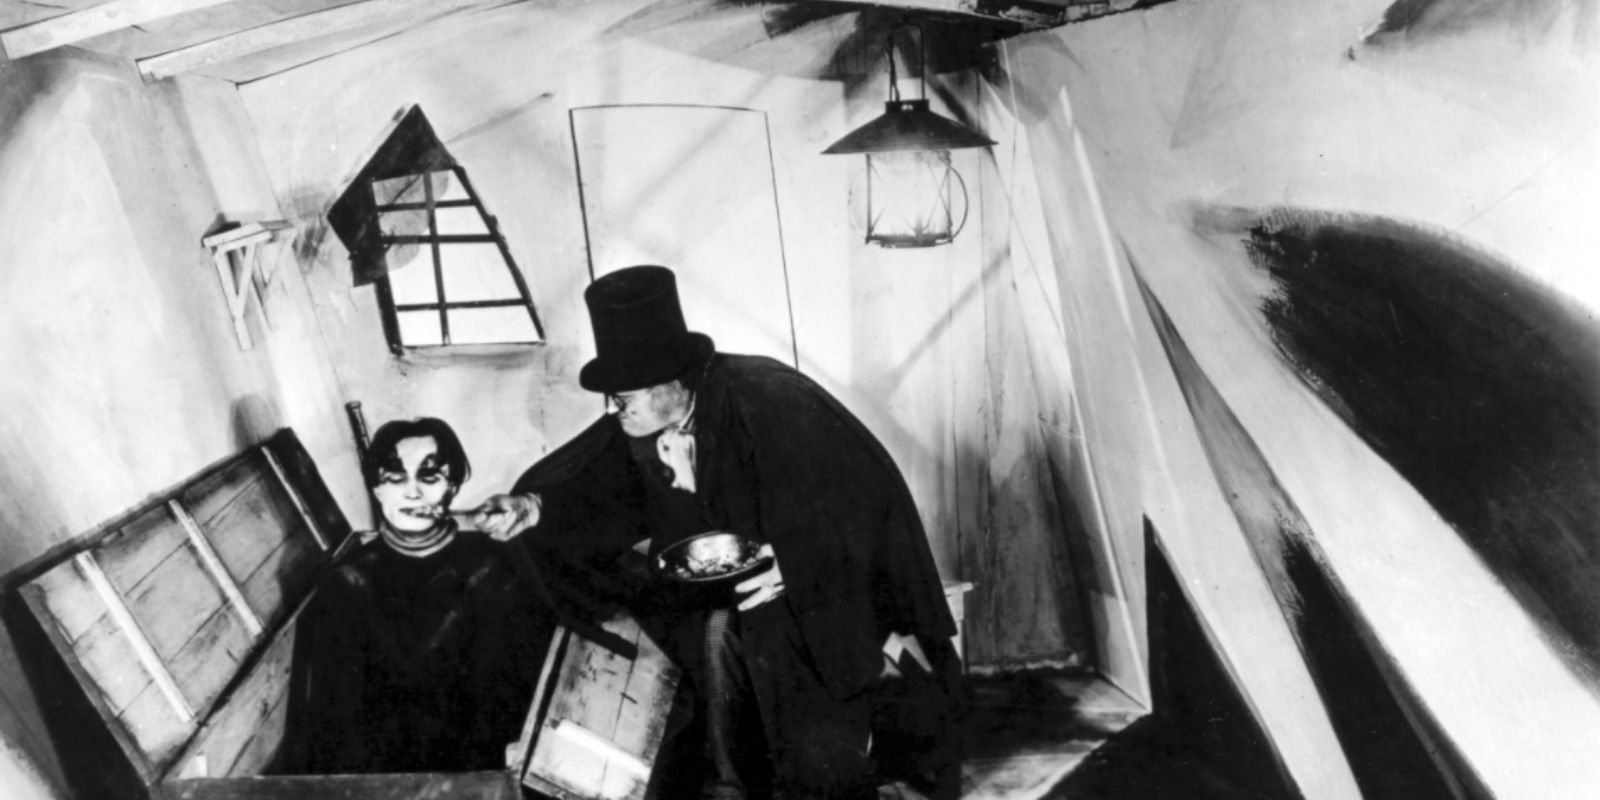 Dr. Caligari wakes his sleeping zombie in the Cabinet of Dr. Caligari 